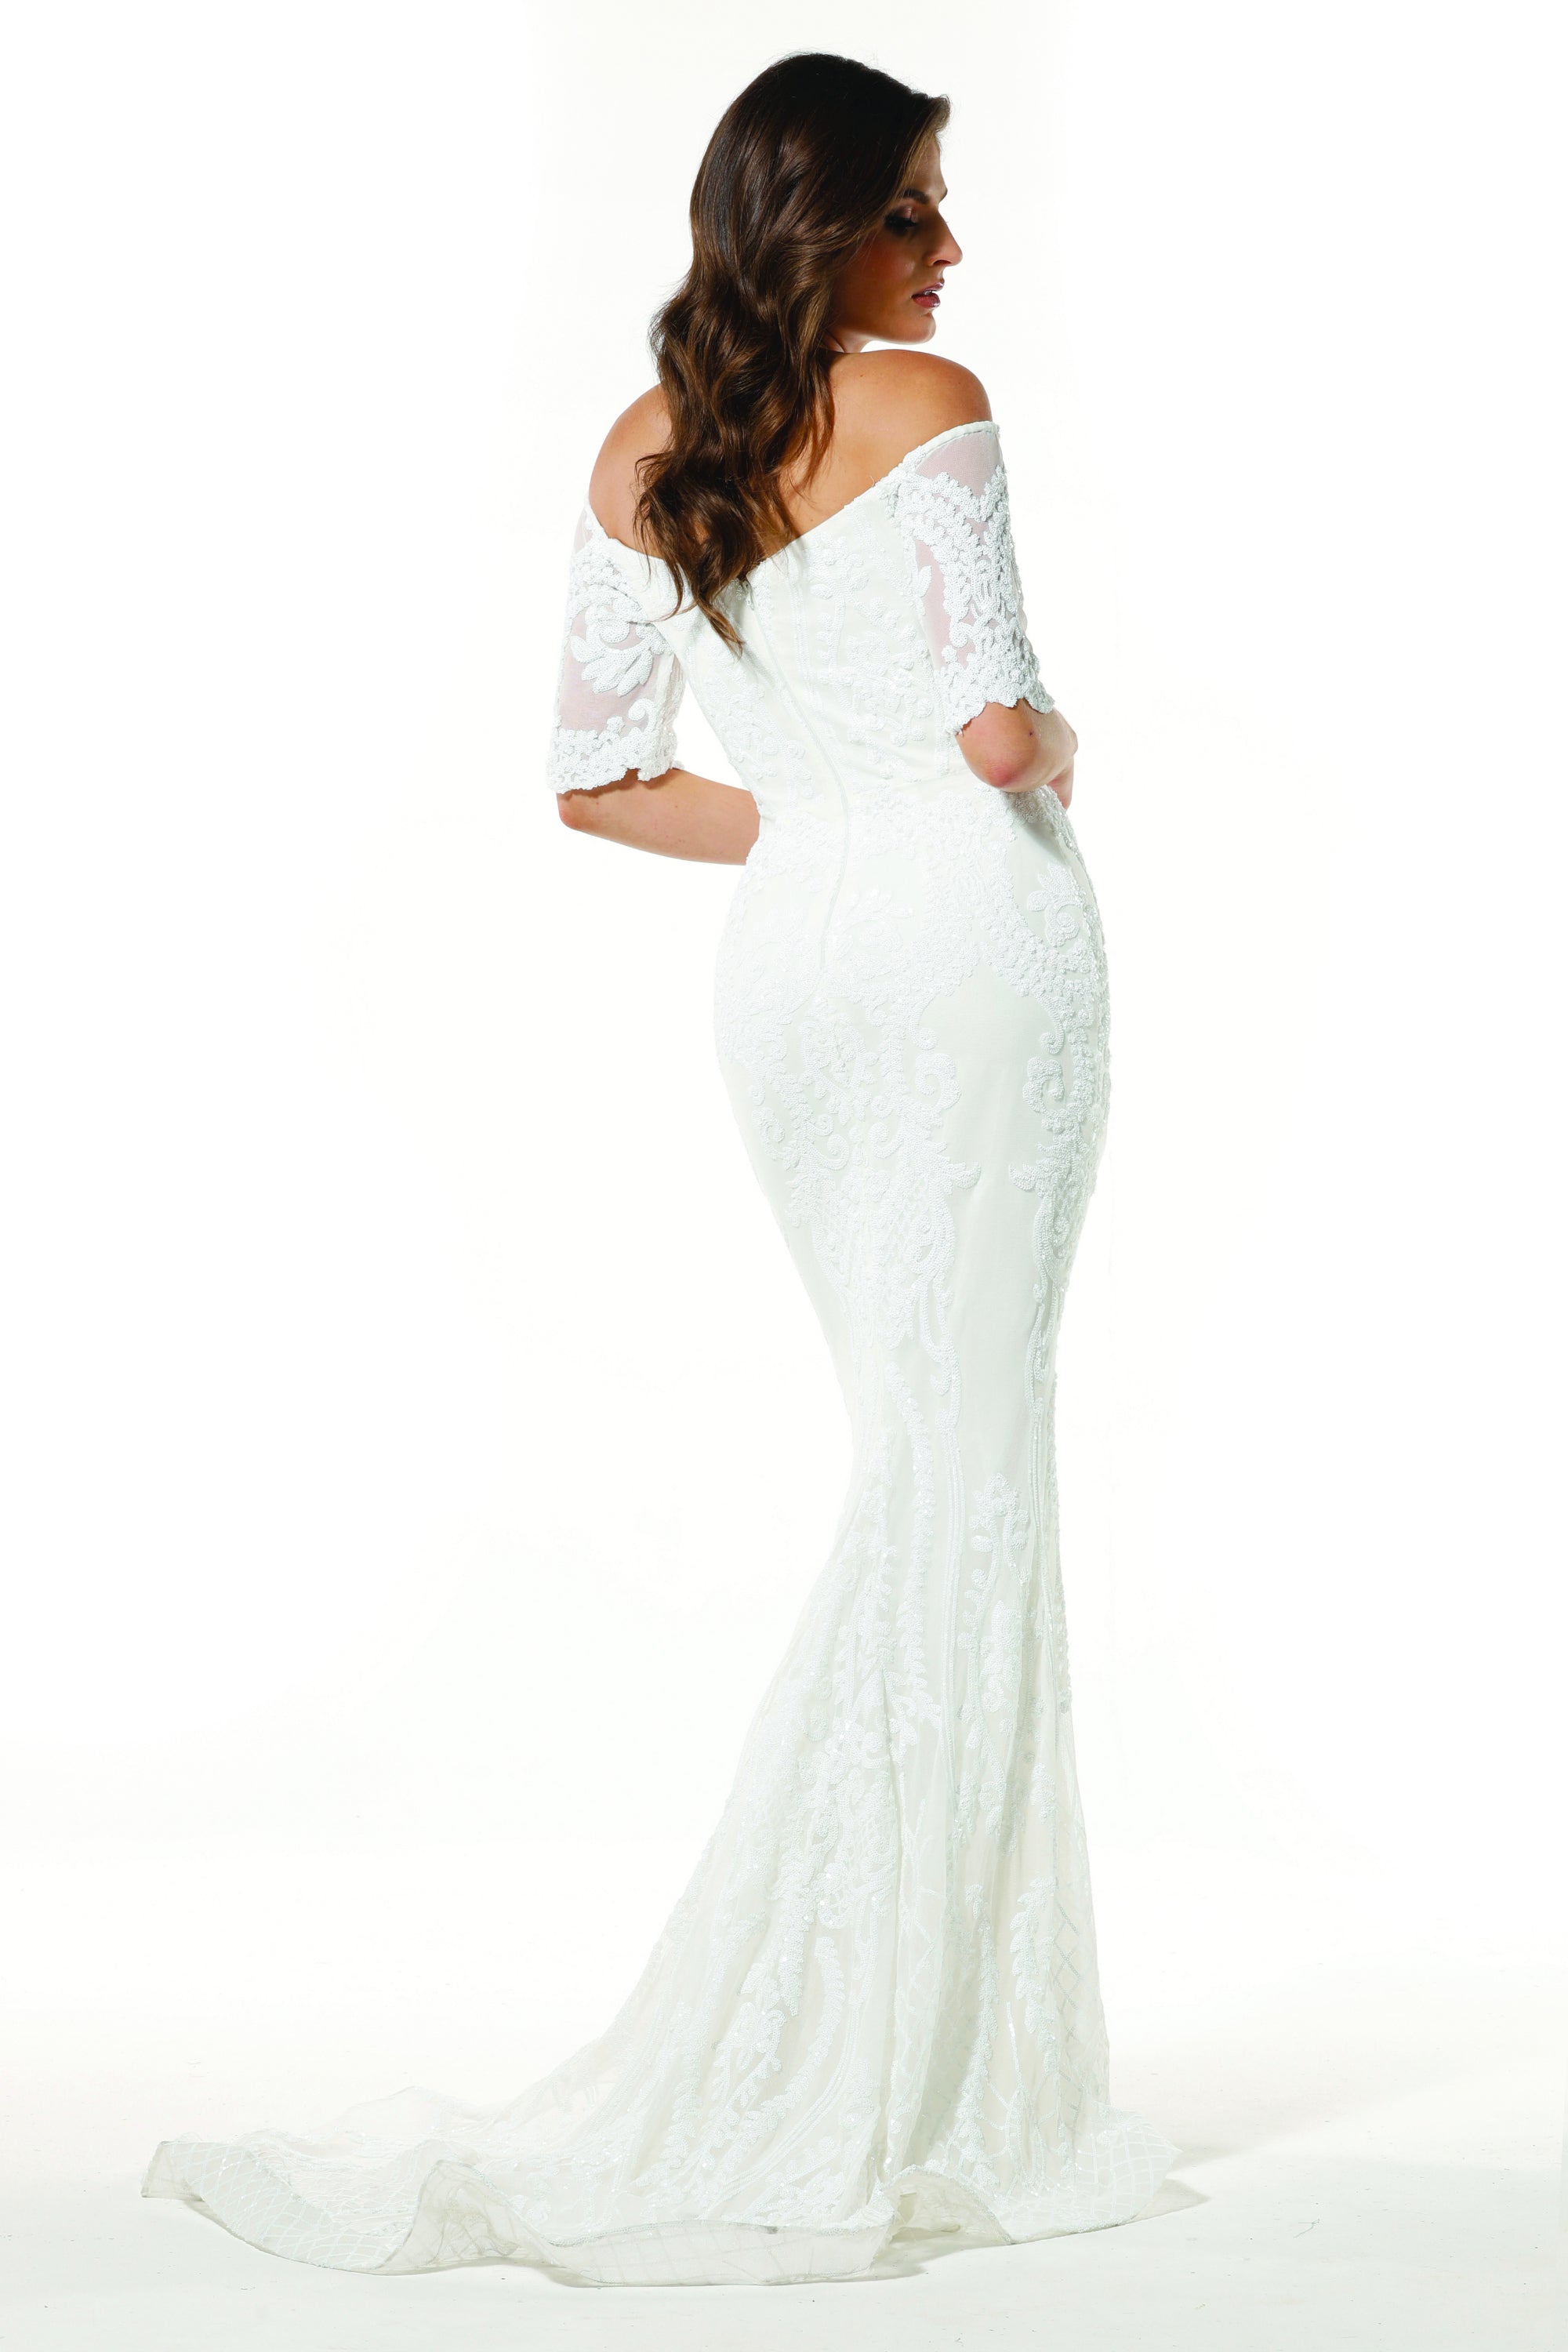 Tinaholy Couture Designer T19005 White Stretch Sequin Formal Wedding Gown Dress Tina Holly Couture$ AfterPay Humm ZipPay LayBuy Sezzle